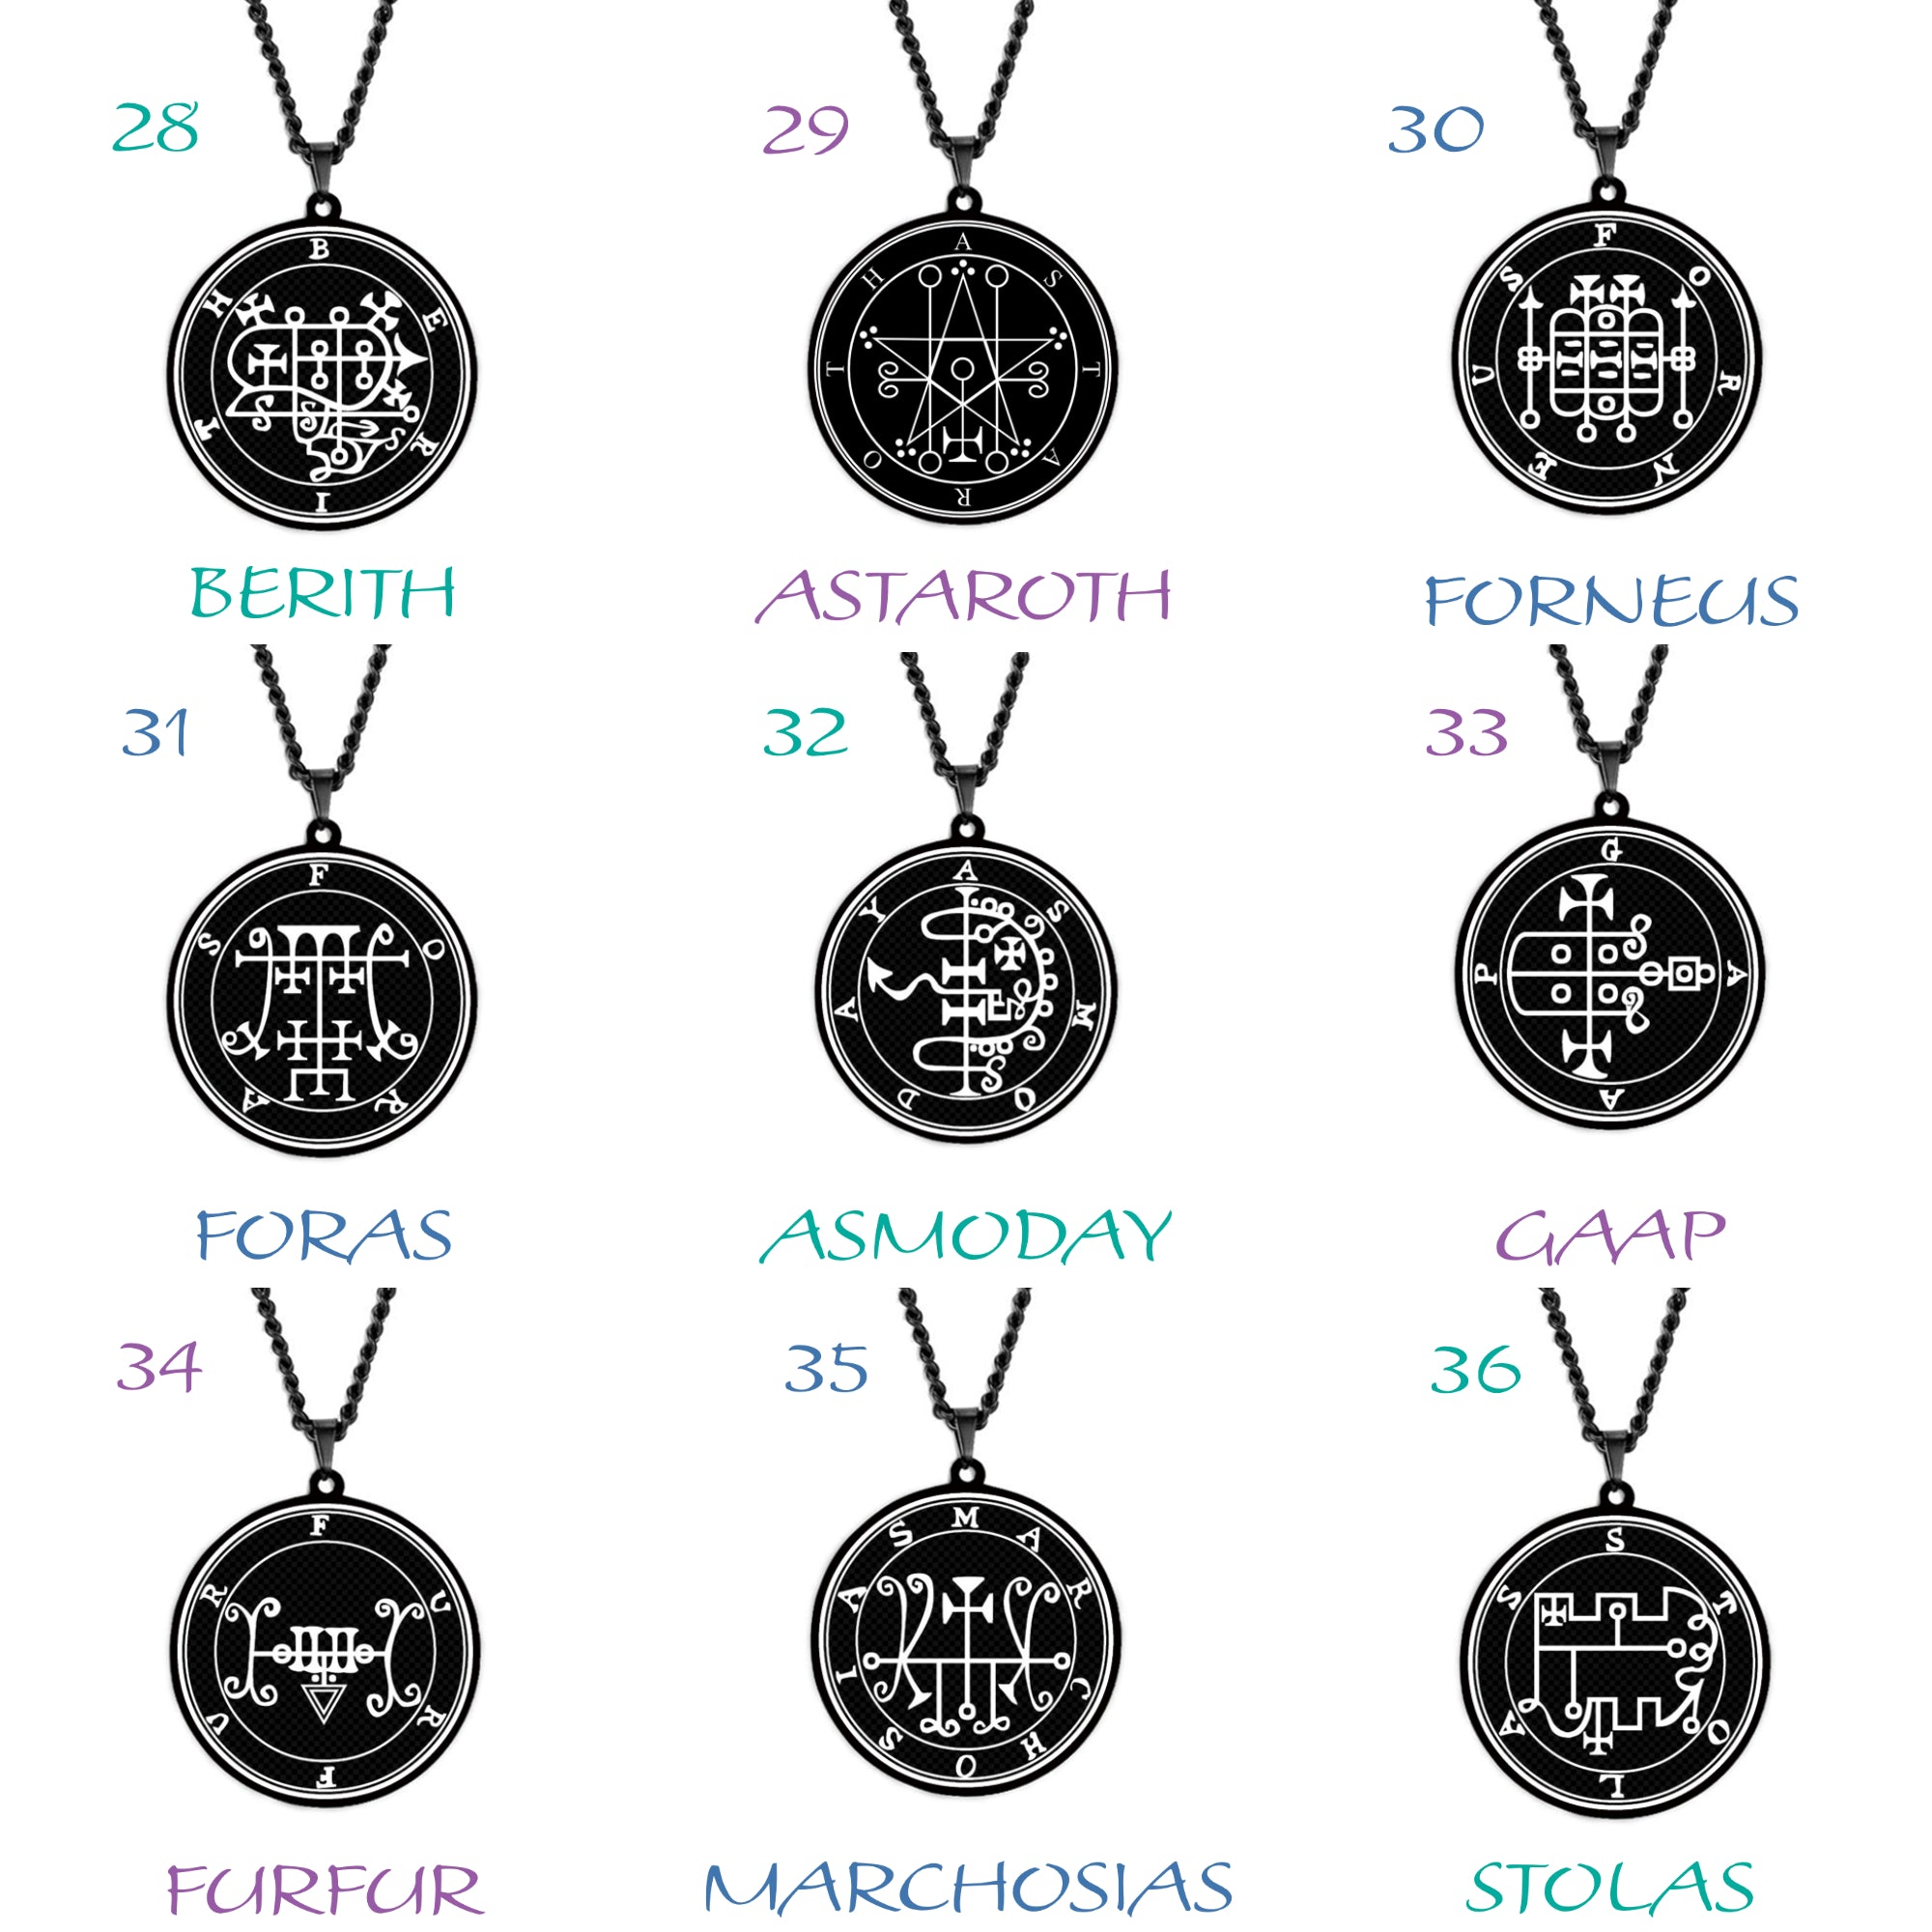 Black Necklace Of Demon Sigil From The Lesser Key Of Solomon | Goetia Magick Goth Pendant | Lemegeton Witchcraft Jewelry For Witchy Men | Apollo Tarot Jewelry Shop